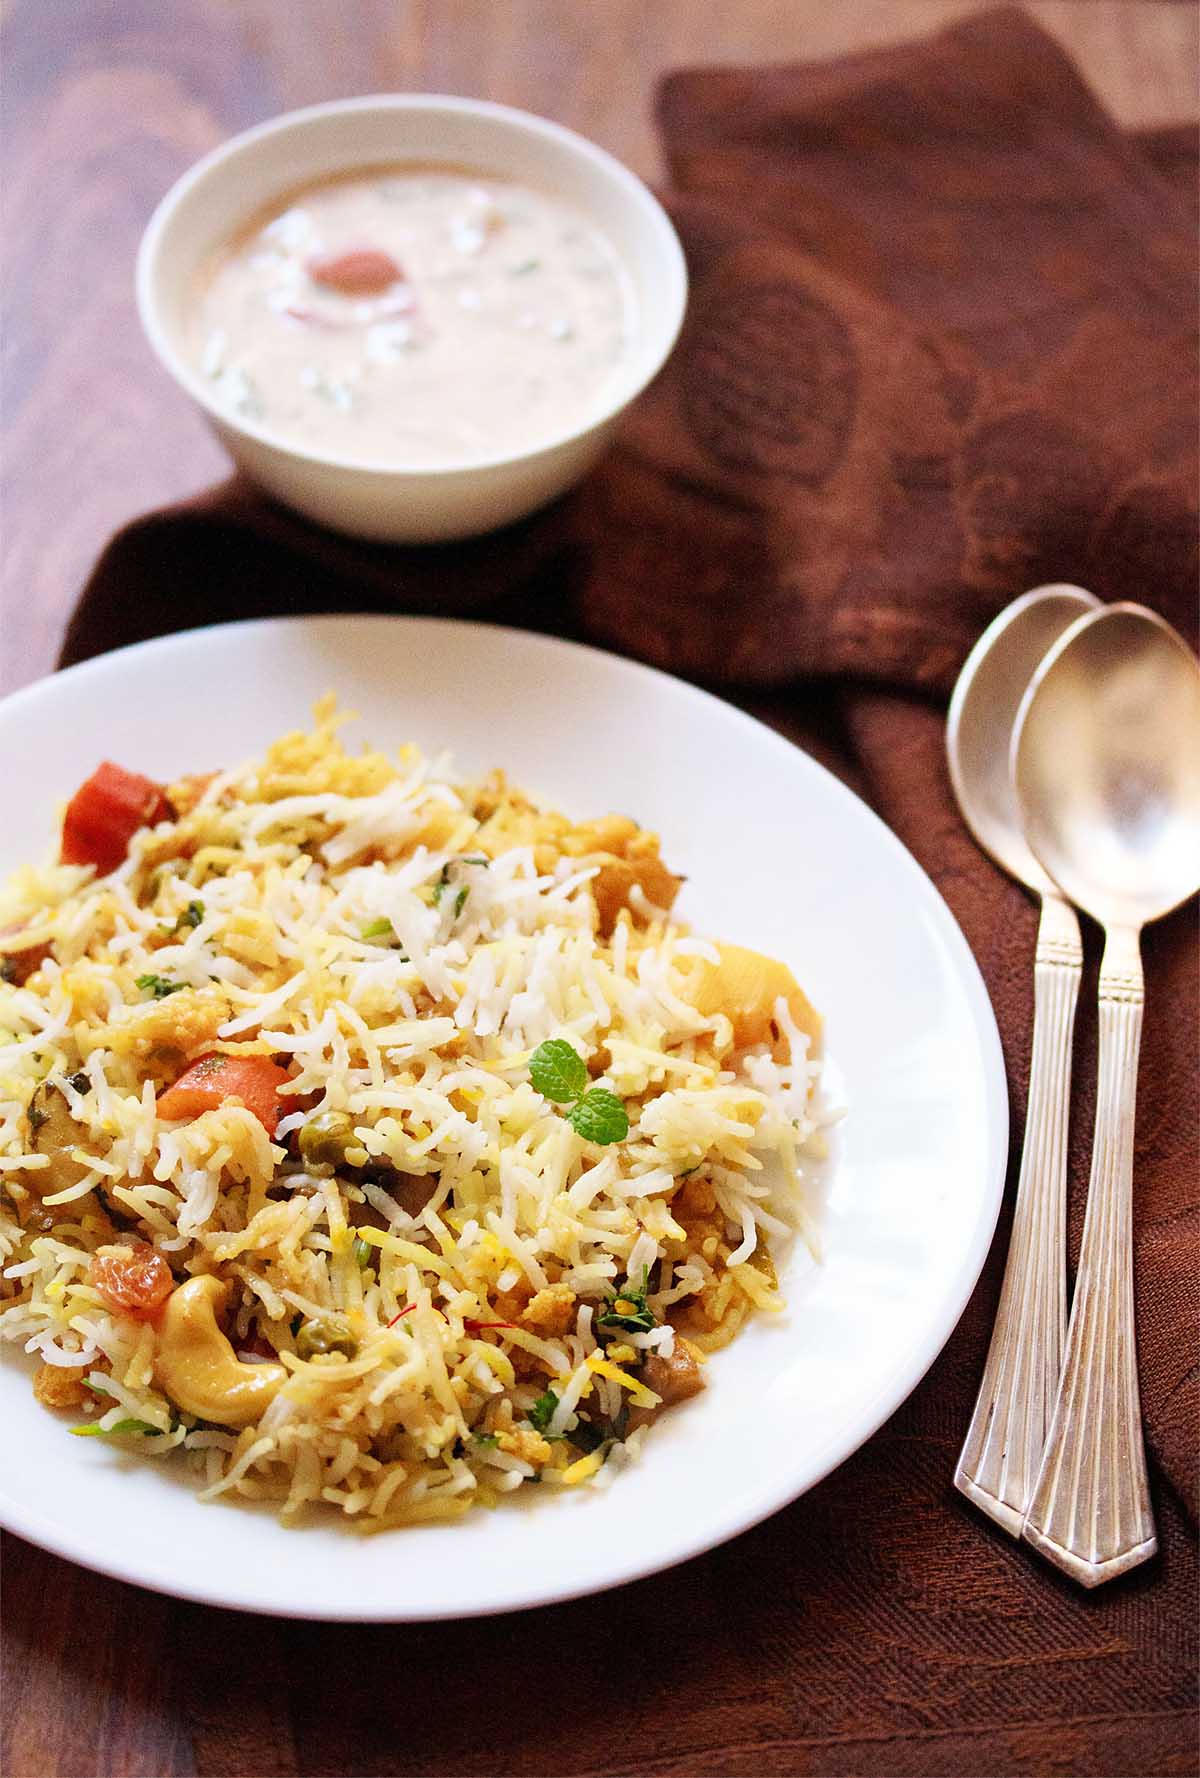 Top shot of veg biryani on white plate next to yogurt raita in small white bowl and two spoons on wooden table